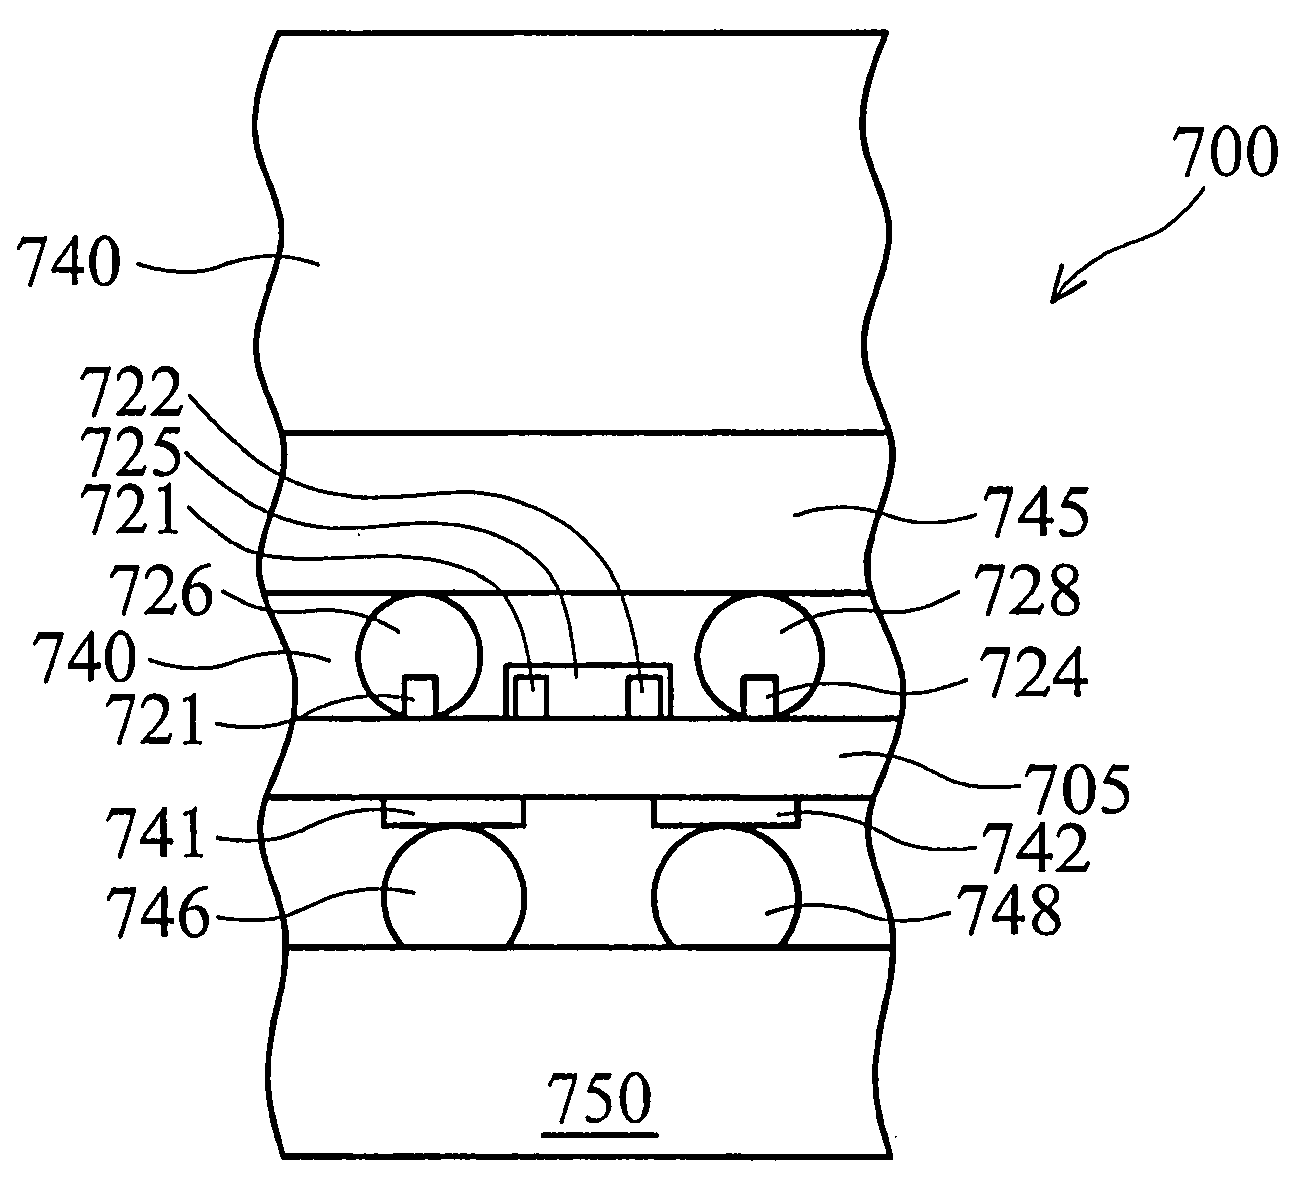 Novel substrate design for semiconductor device